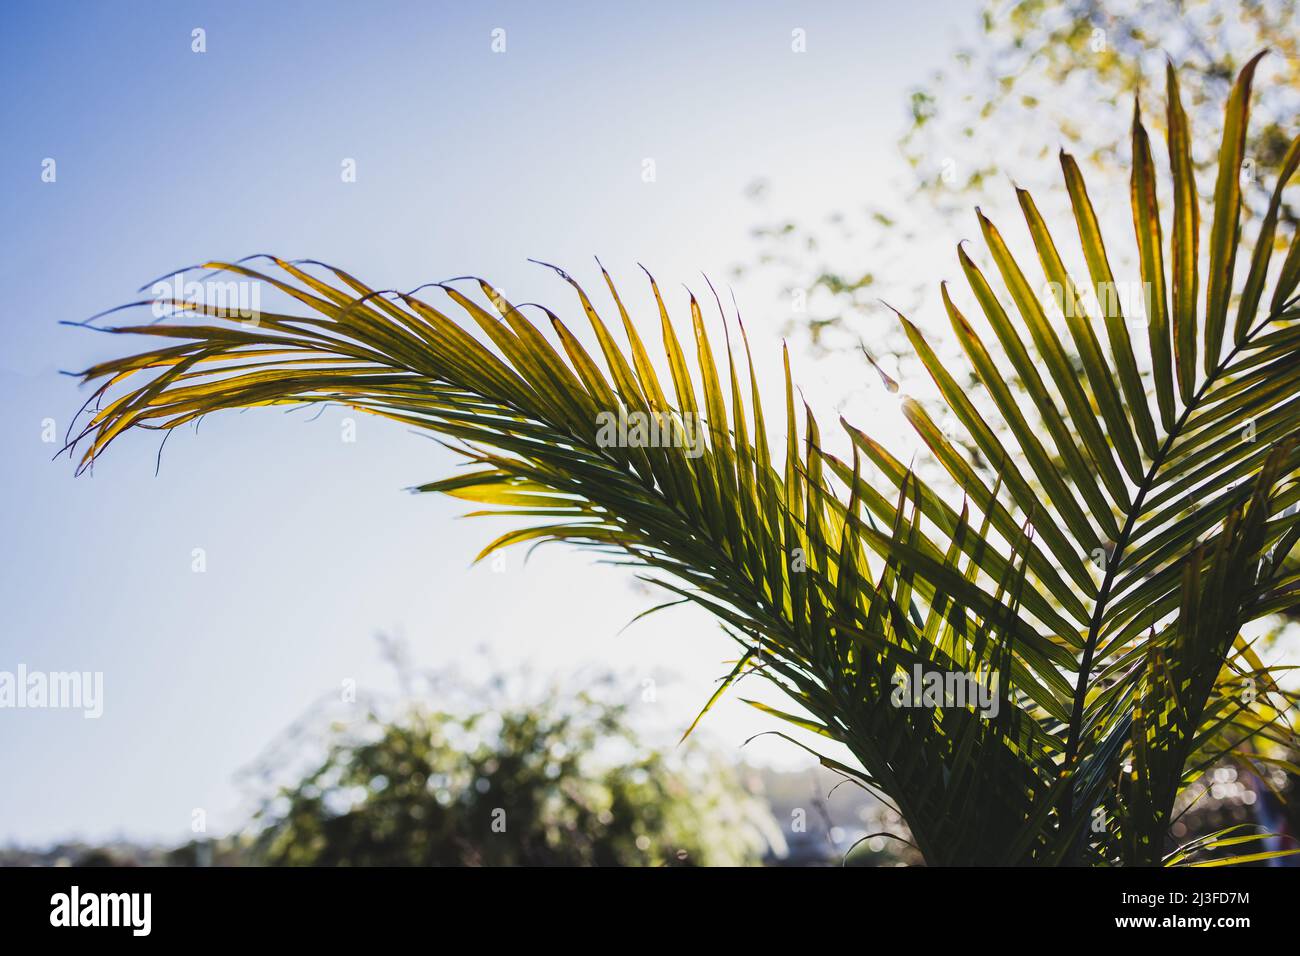 close-up of Majesty palm frond (Ravenea rivularis) glowing in the sunlight outdoor in sunny backyard shot at shallow depth of field Stock Photo